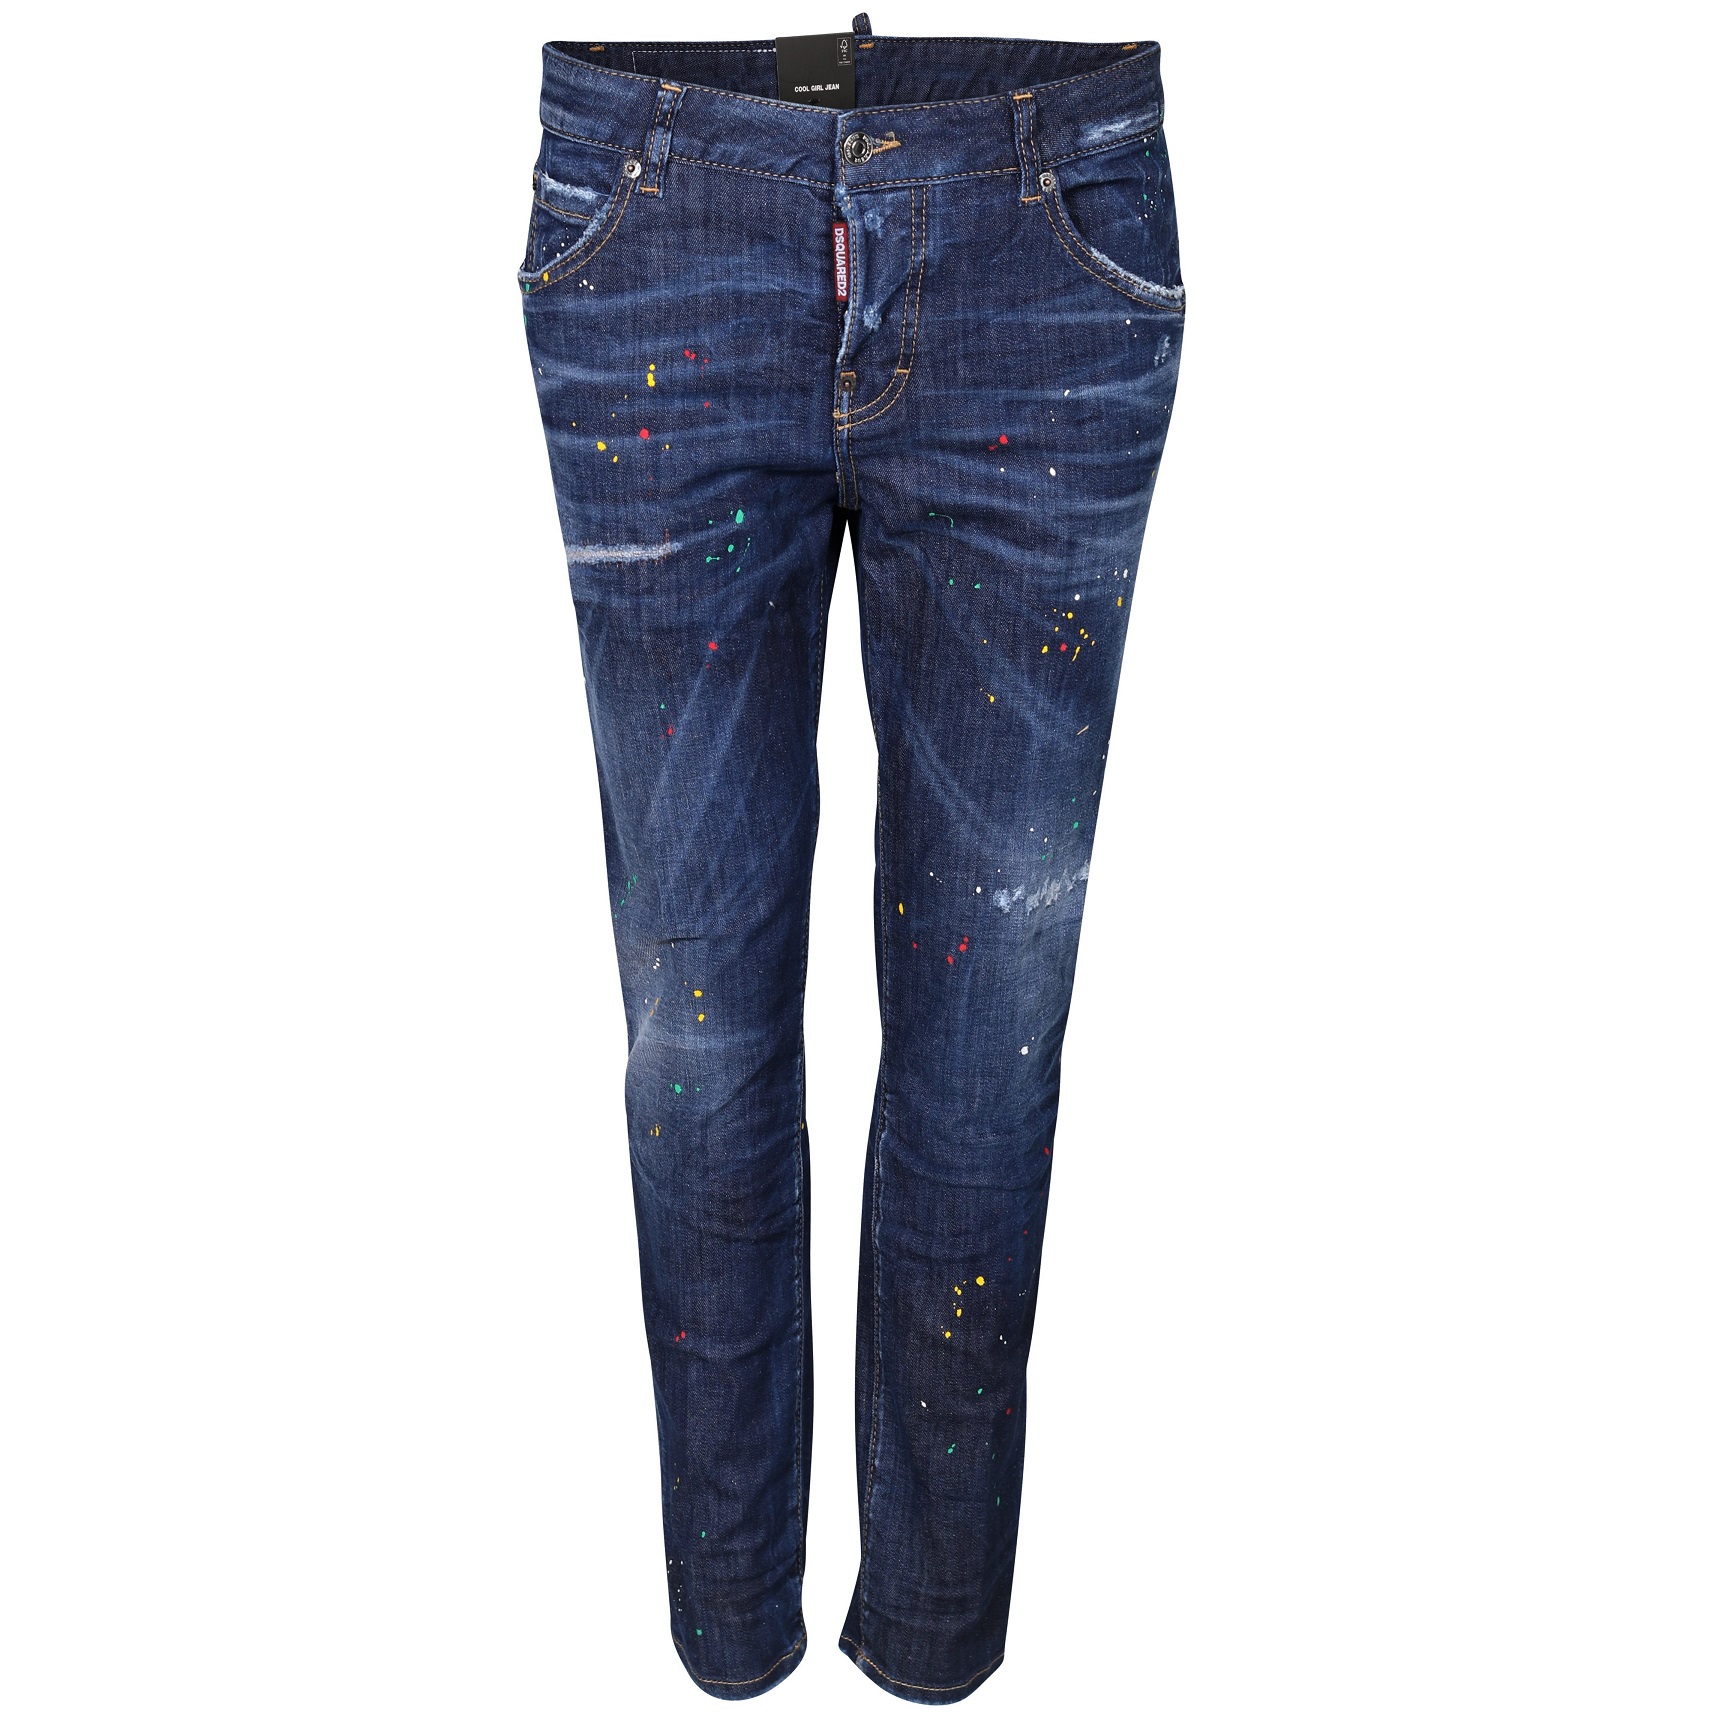 DSQUARED2 Jeans Cool Girl in Washed Dark Blue Color Dots 36